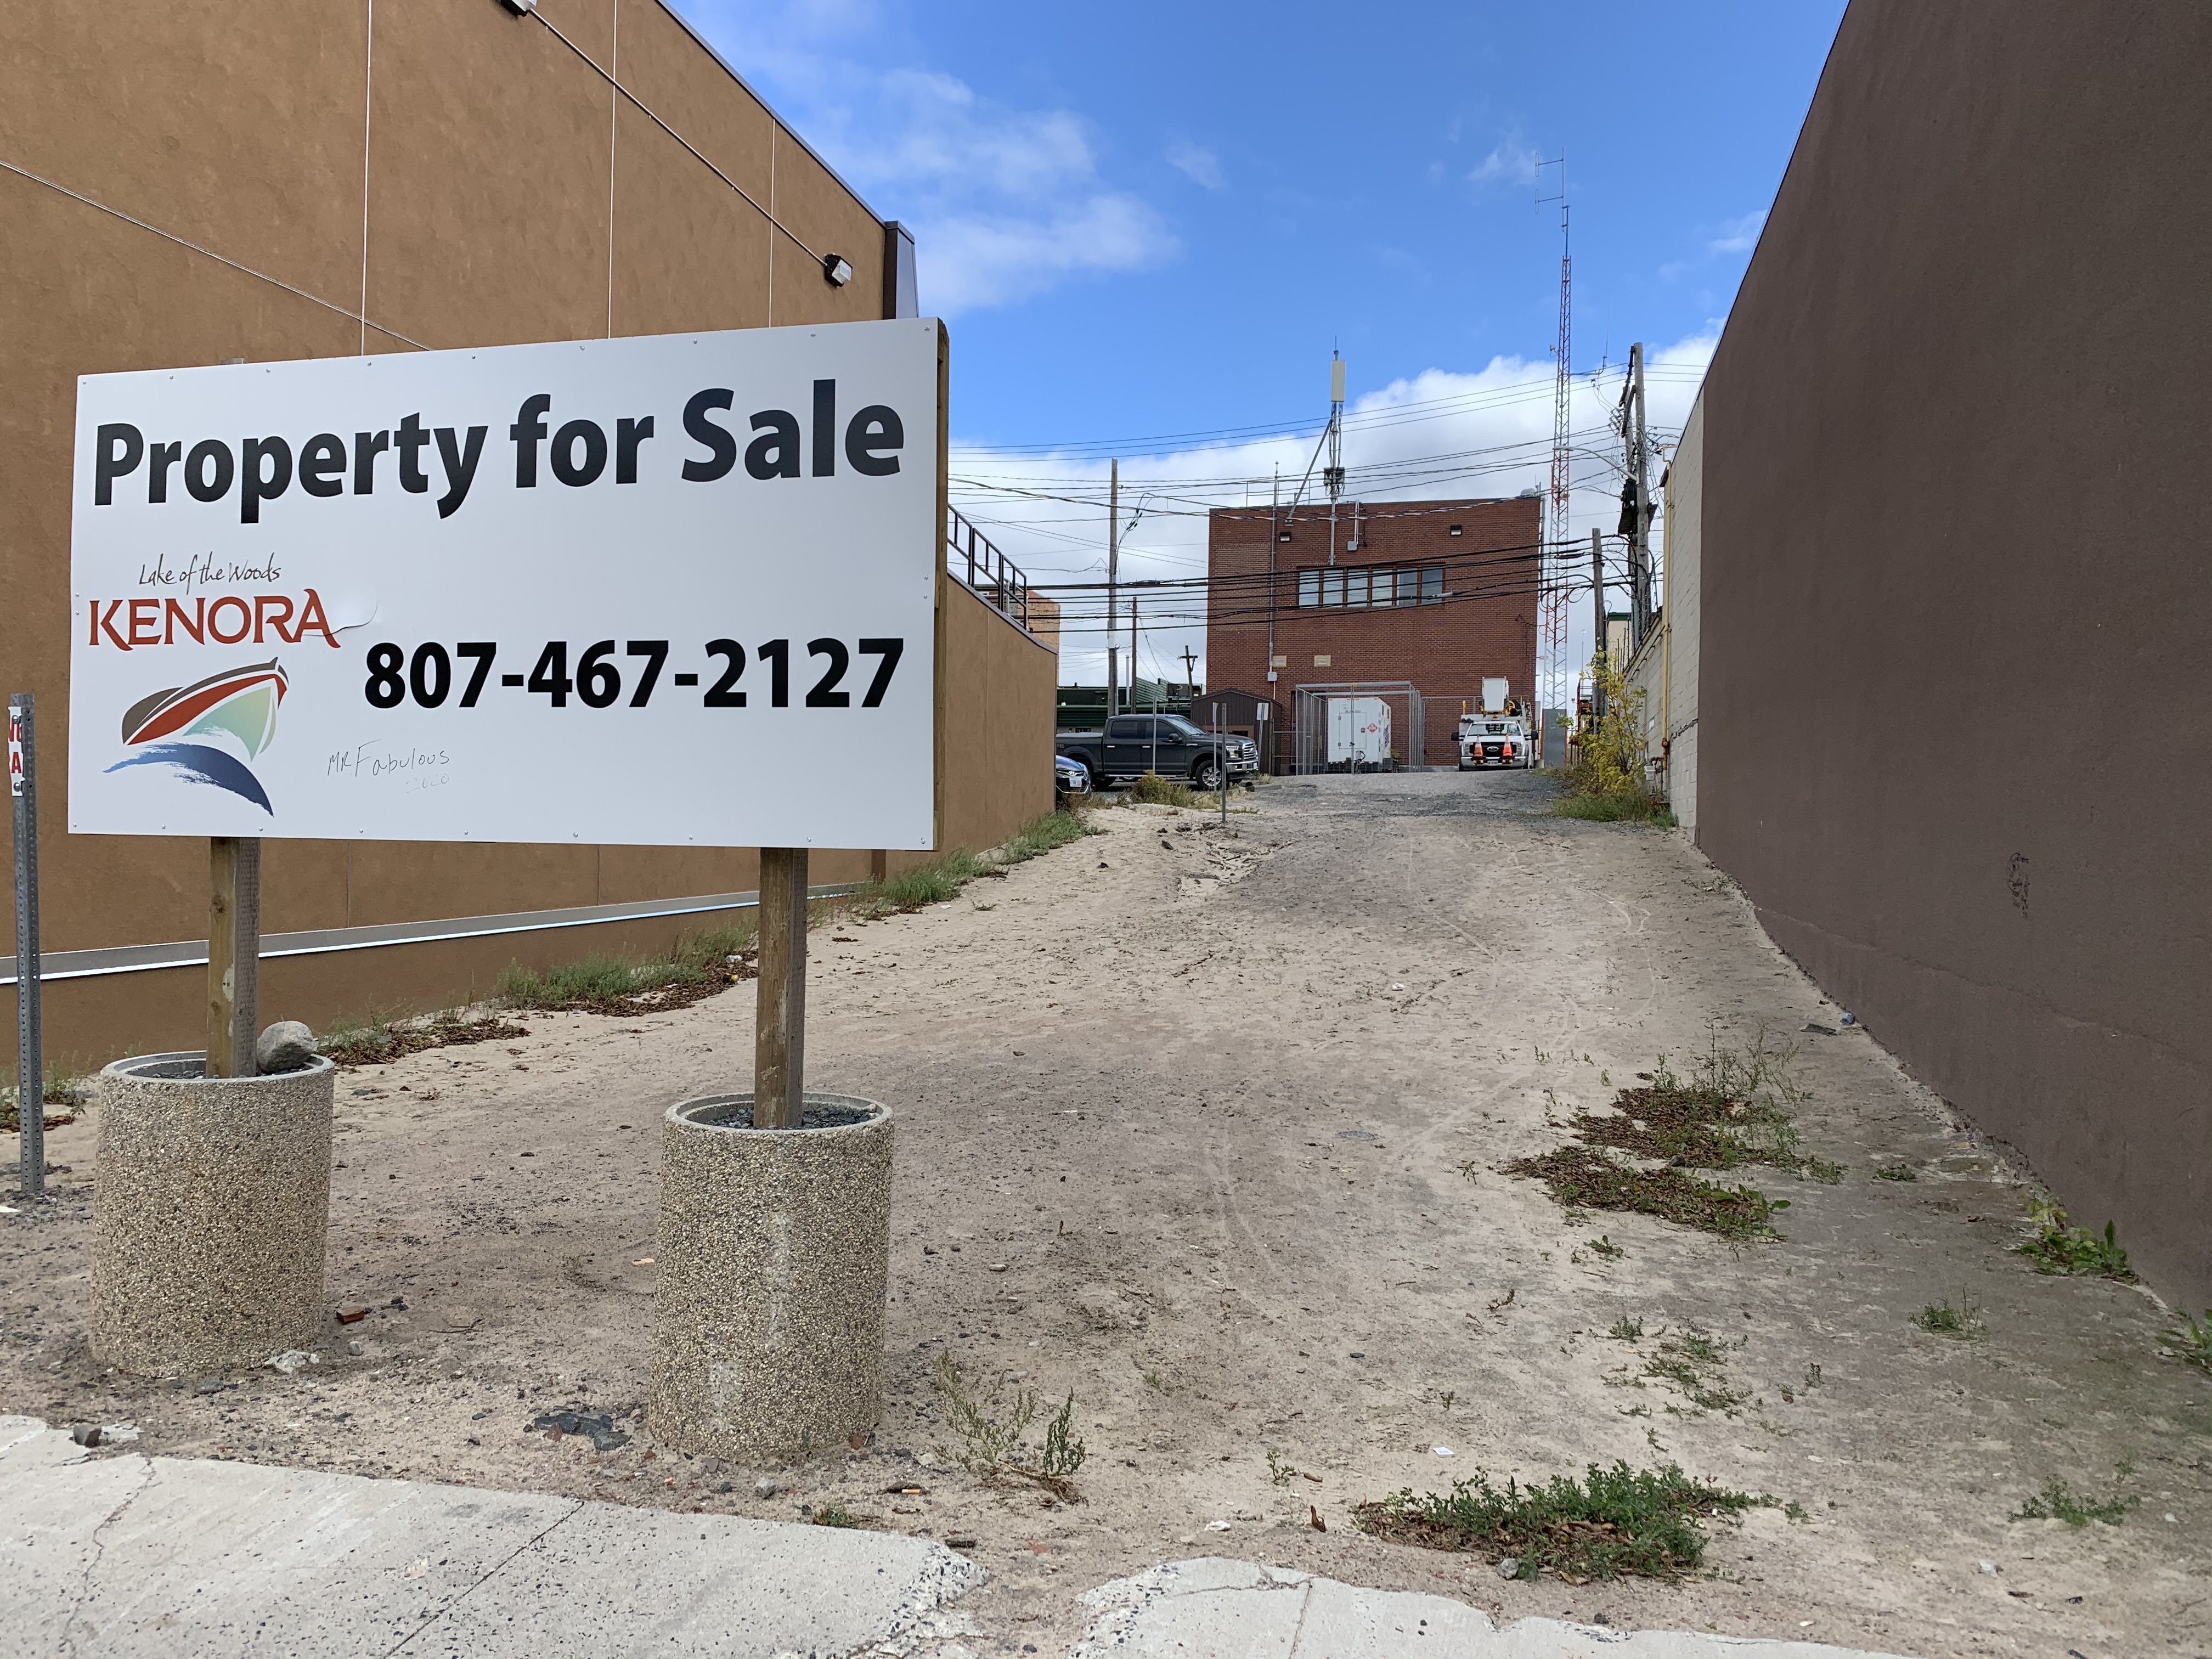 vacant property between two buildings with for sale sign